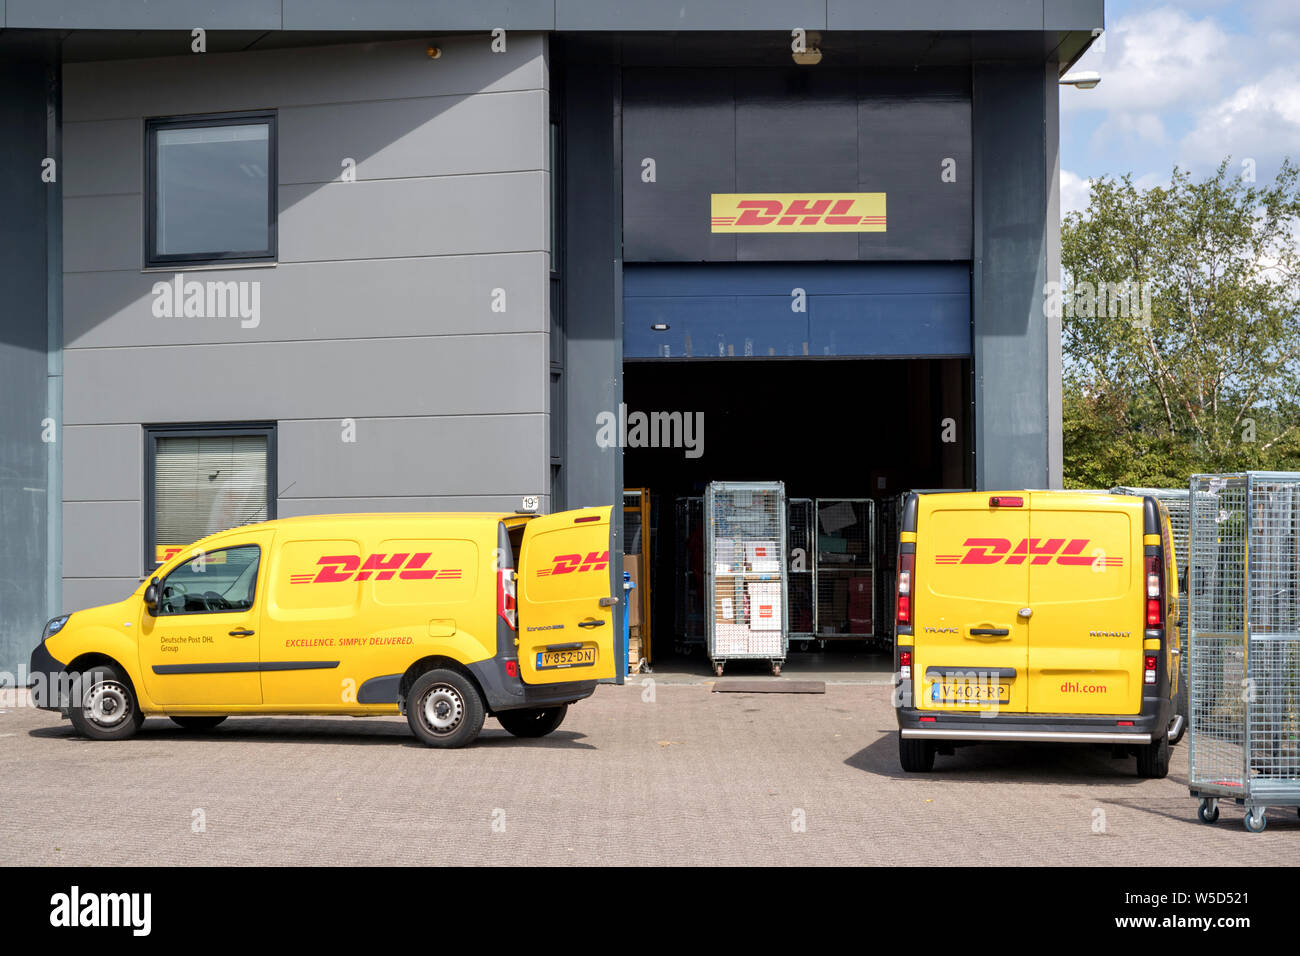 DHL depot. DHL is a division of the German logistics company Deutsche Post AG providing international express mail services. Stock Photo